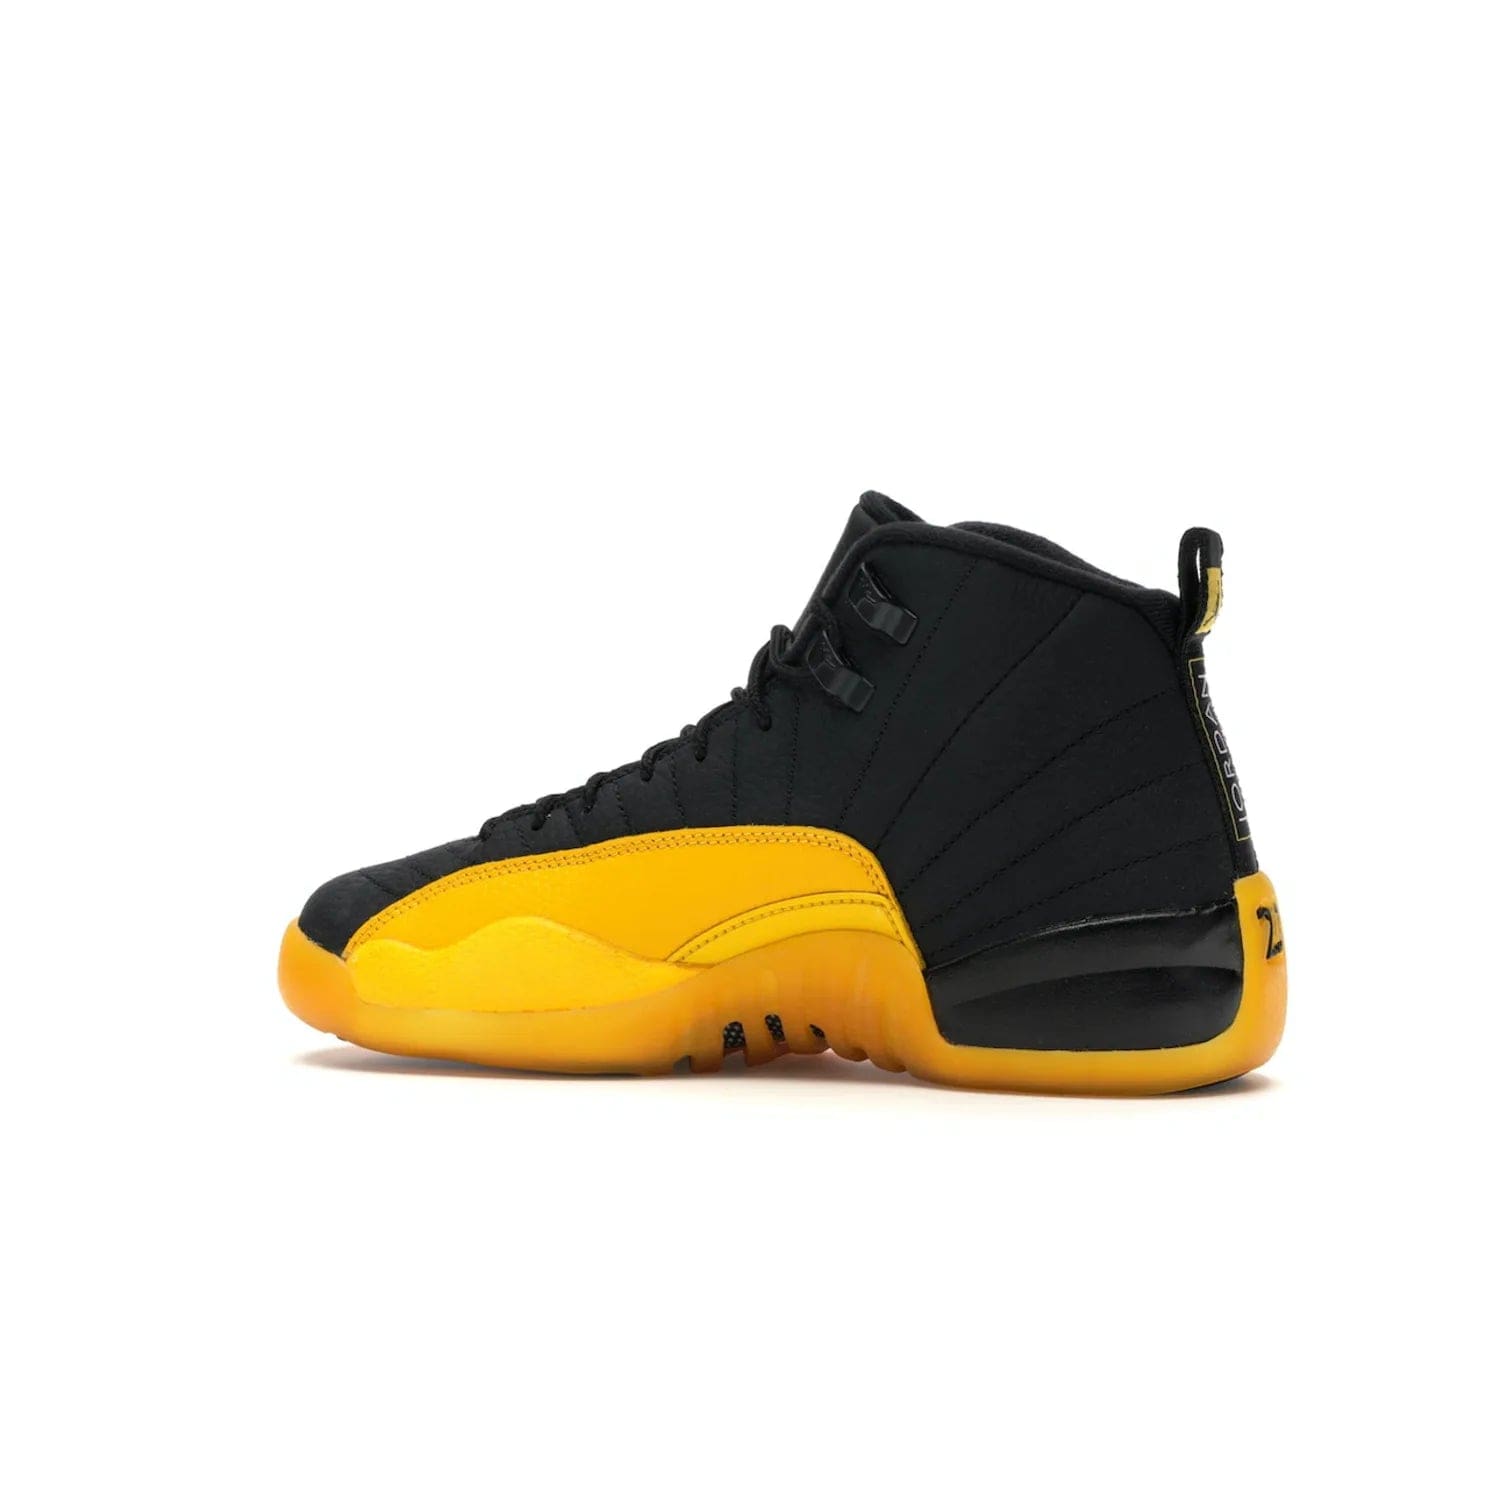 Jordan 12 Retro Black University Gold (GS) - Image 21 - Only at www.BallersClubKickz.com - Upgrade your kid's shoe collection with the Jordan 12 Retro Black University Gold. With classic style, black tumbled leather upper, and University Gold accents, it's a great summer look. Out July 2020.